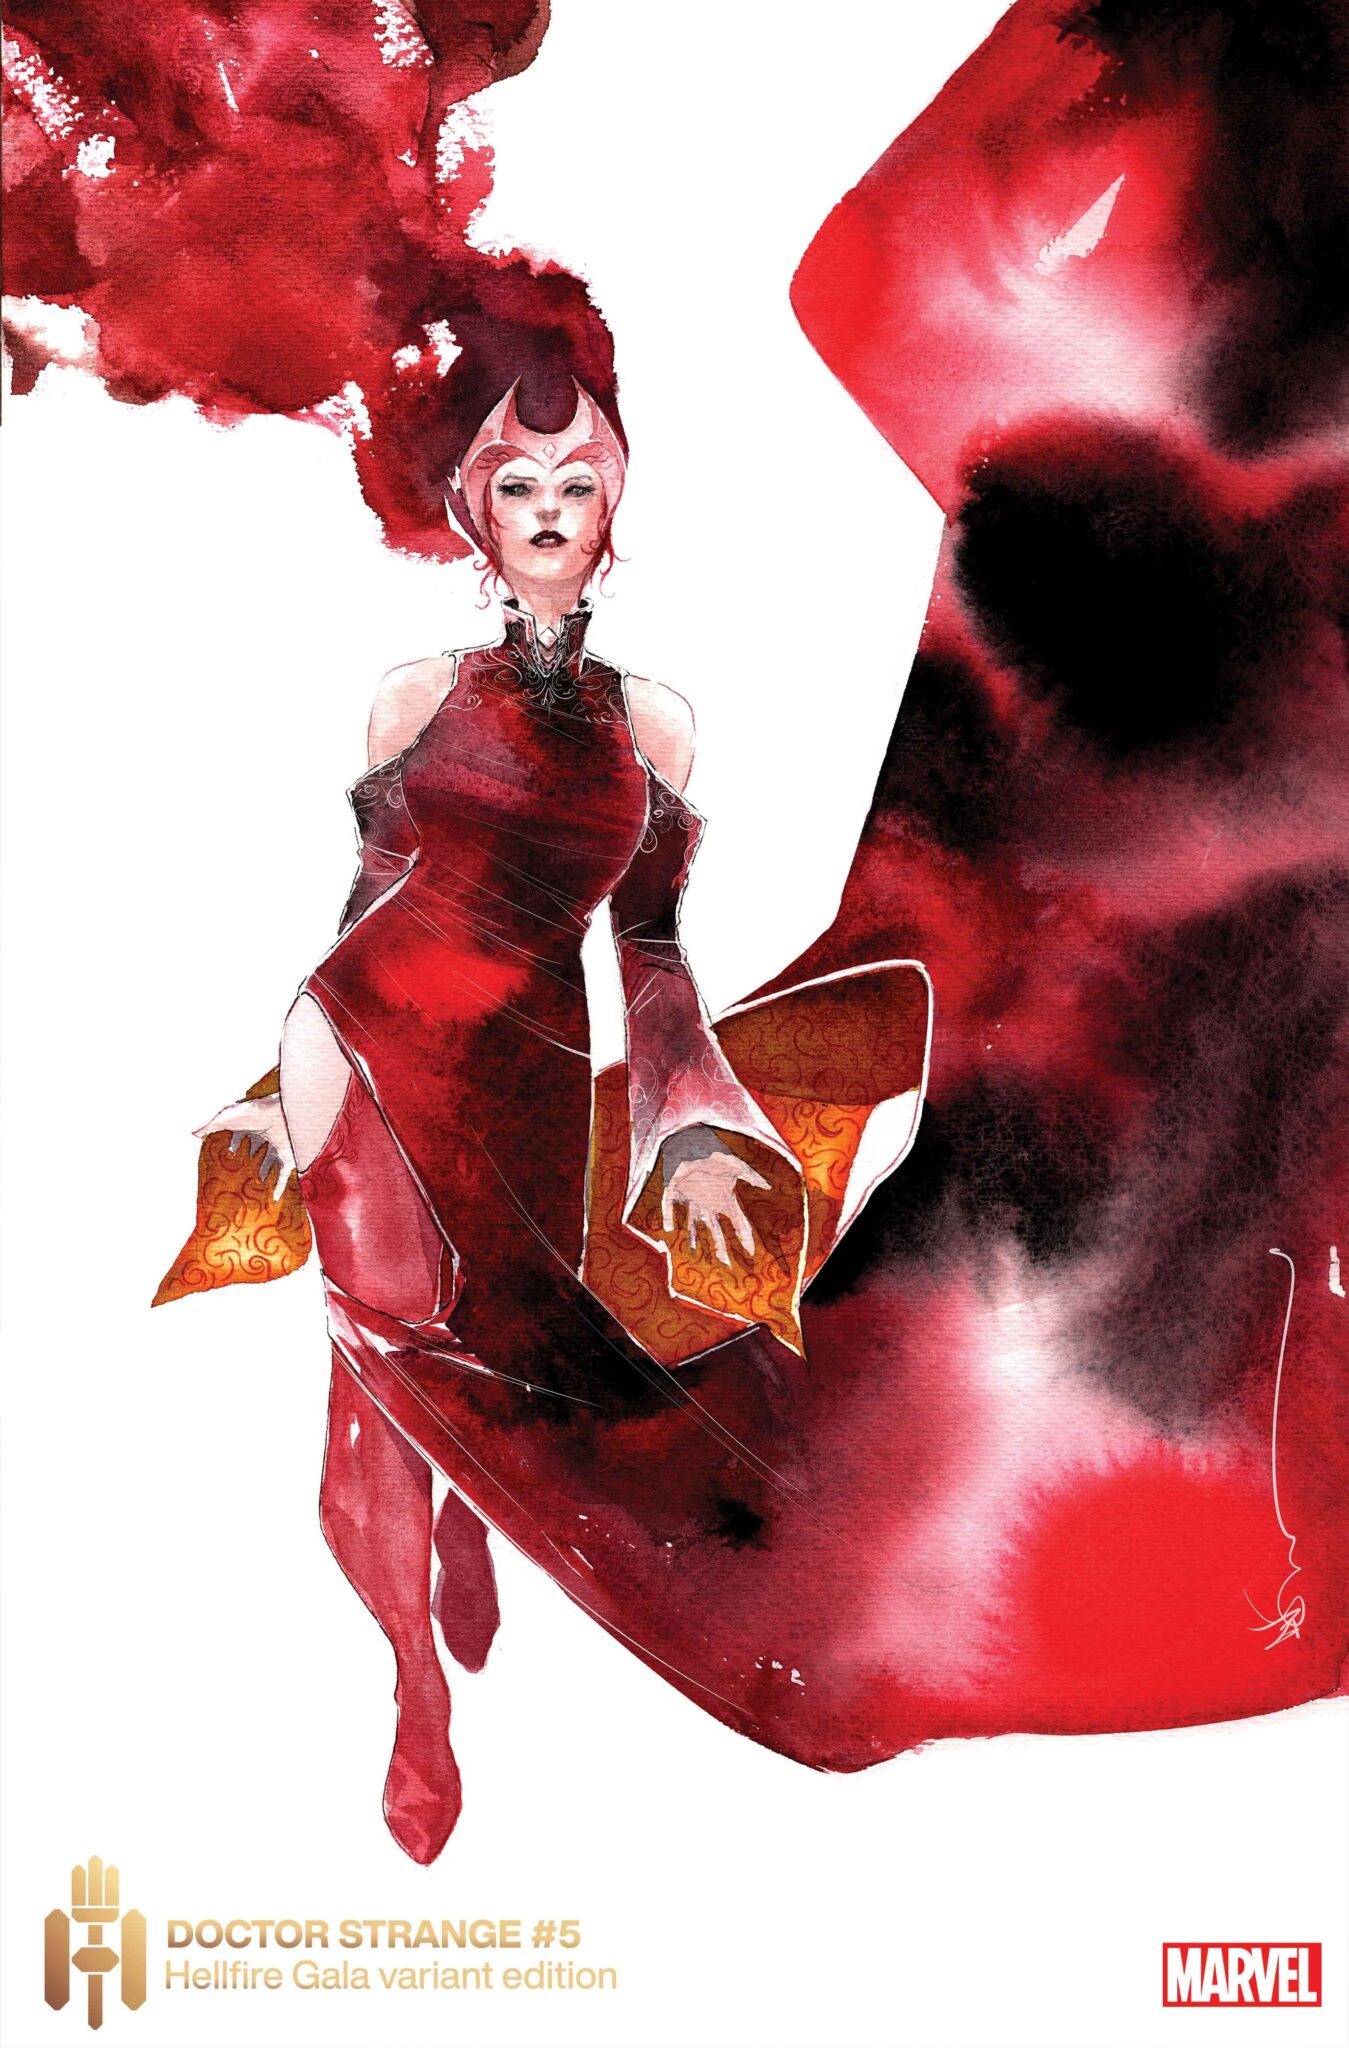 Scarlet Witch Hellfire Gala variant cover